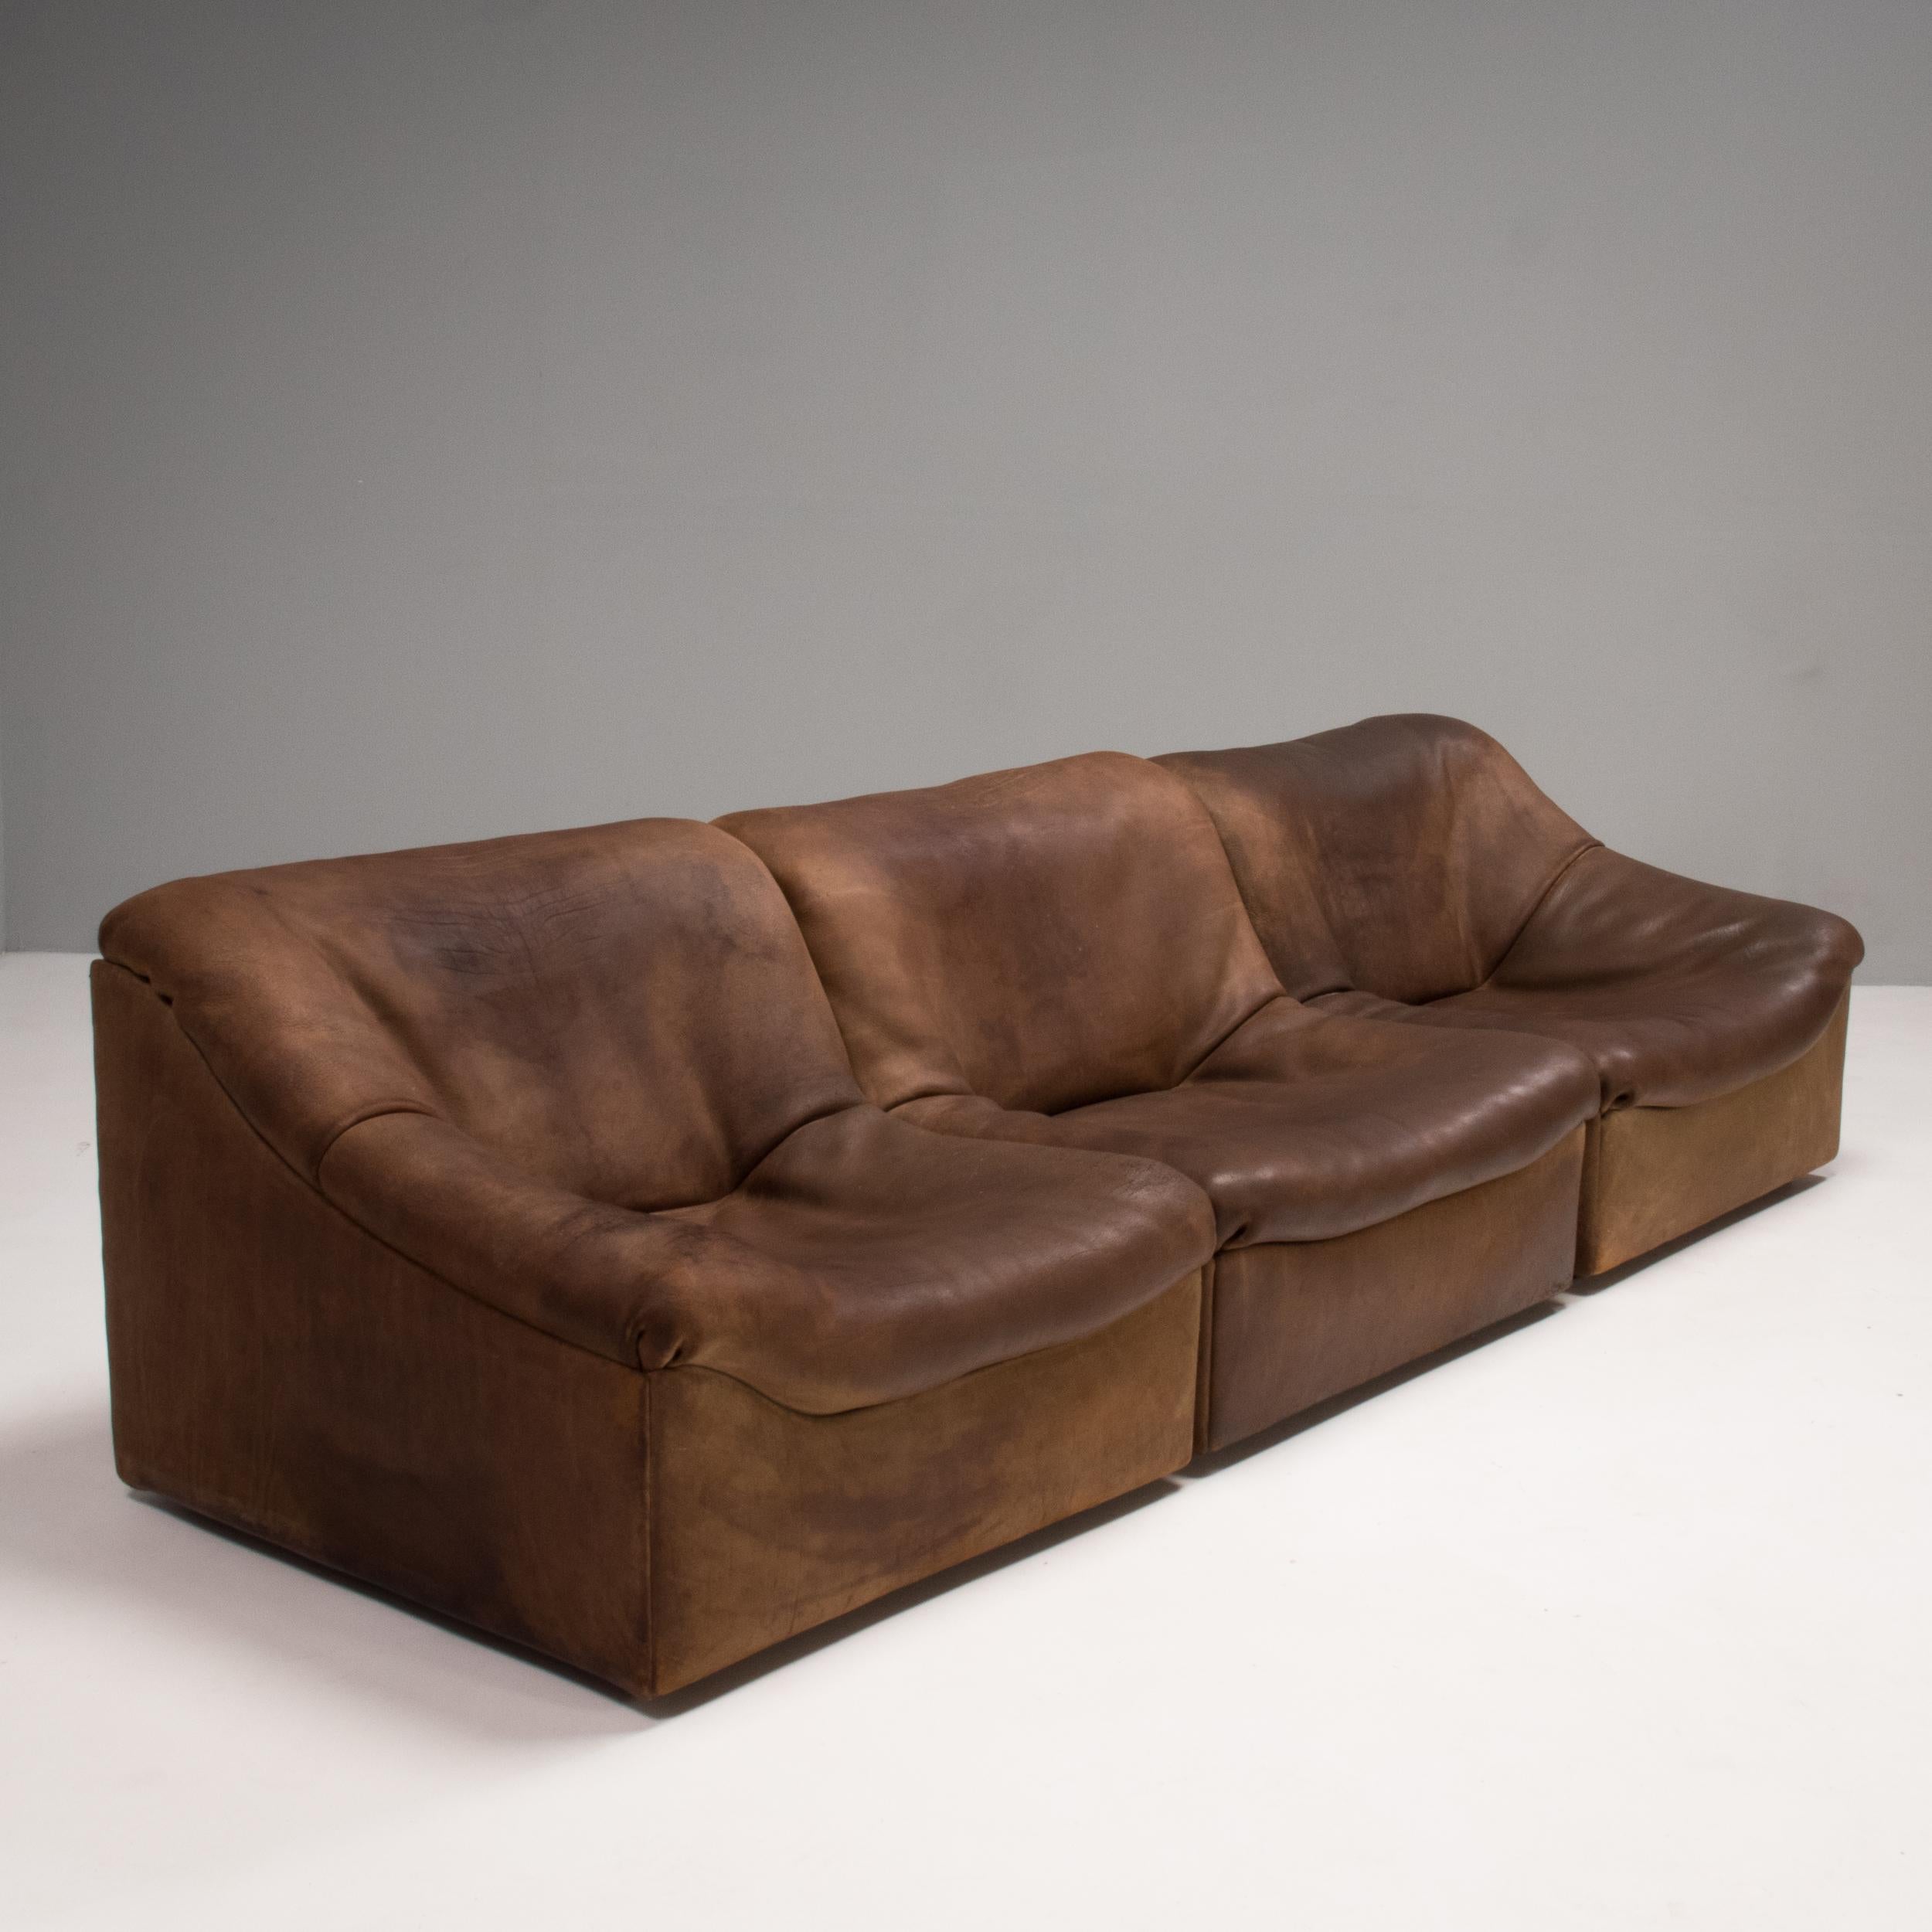 An iconic 1970s design, the DS46 chairs by De Sede are perfect for creating a sectional sofa or used as separate lounge chairs for a multitude of seating options.

Upholstered in soft brown leather, the set consists of two armchairs and one single